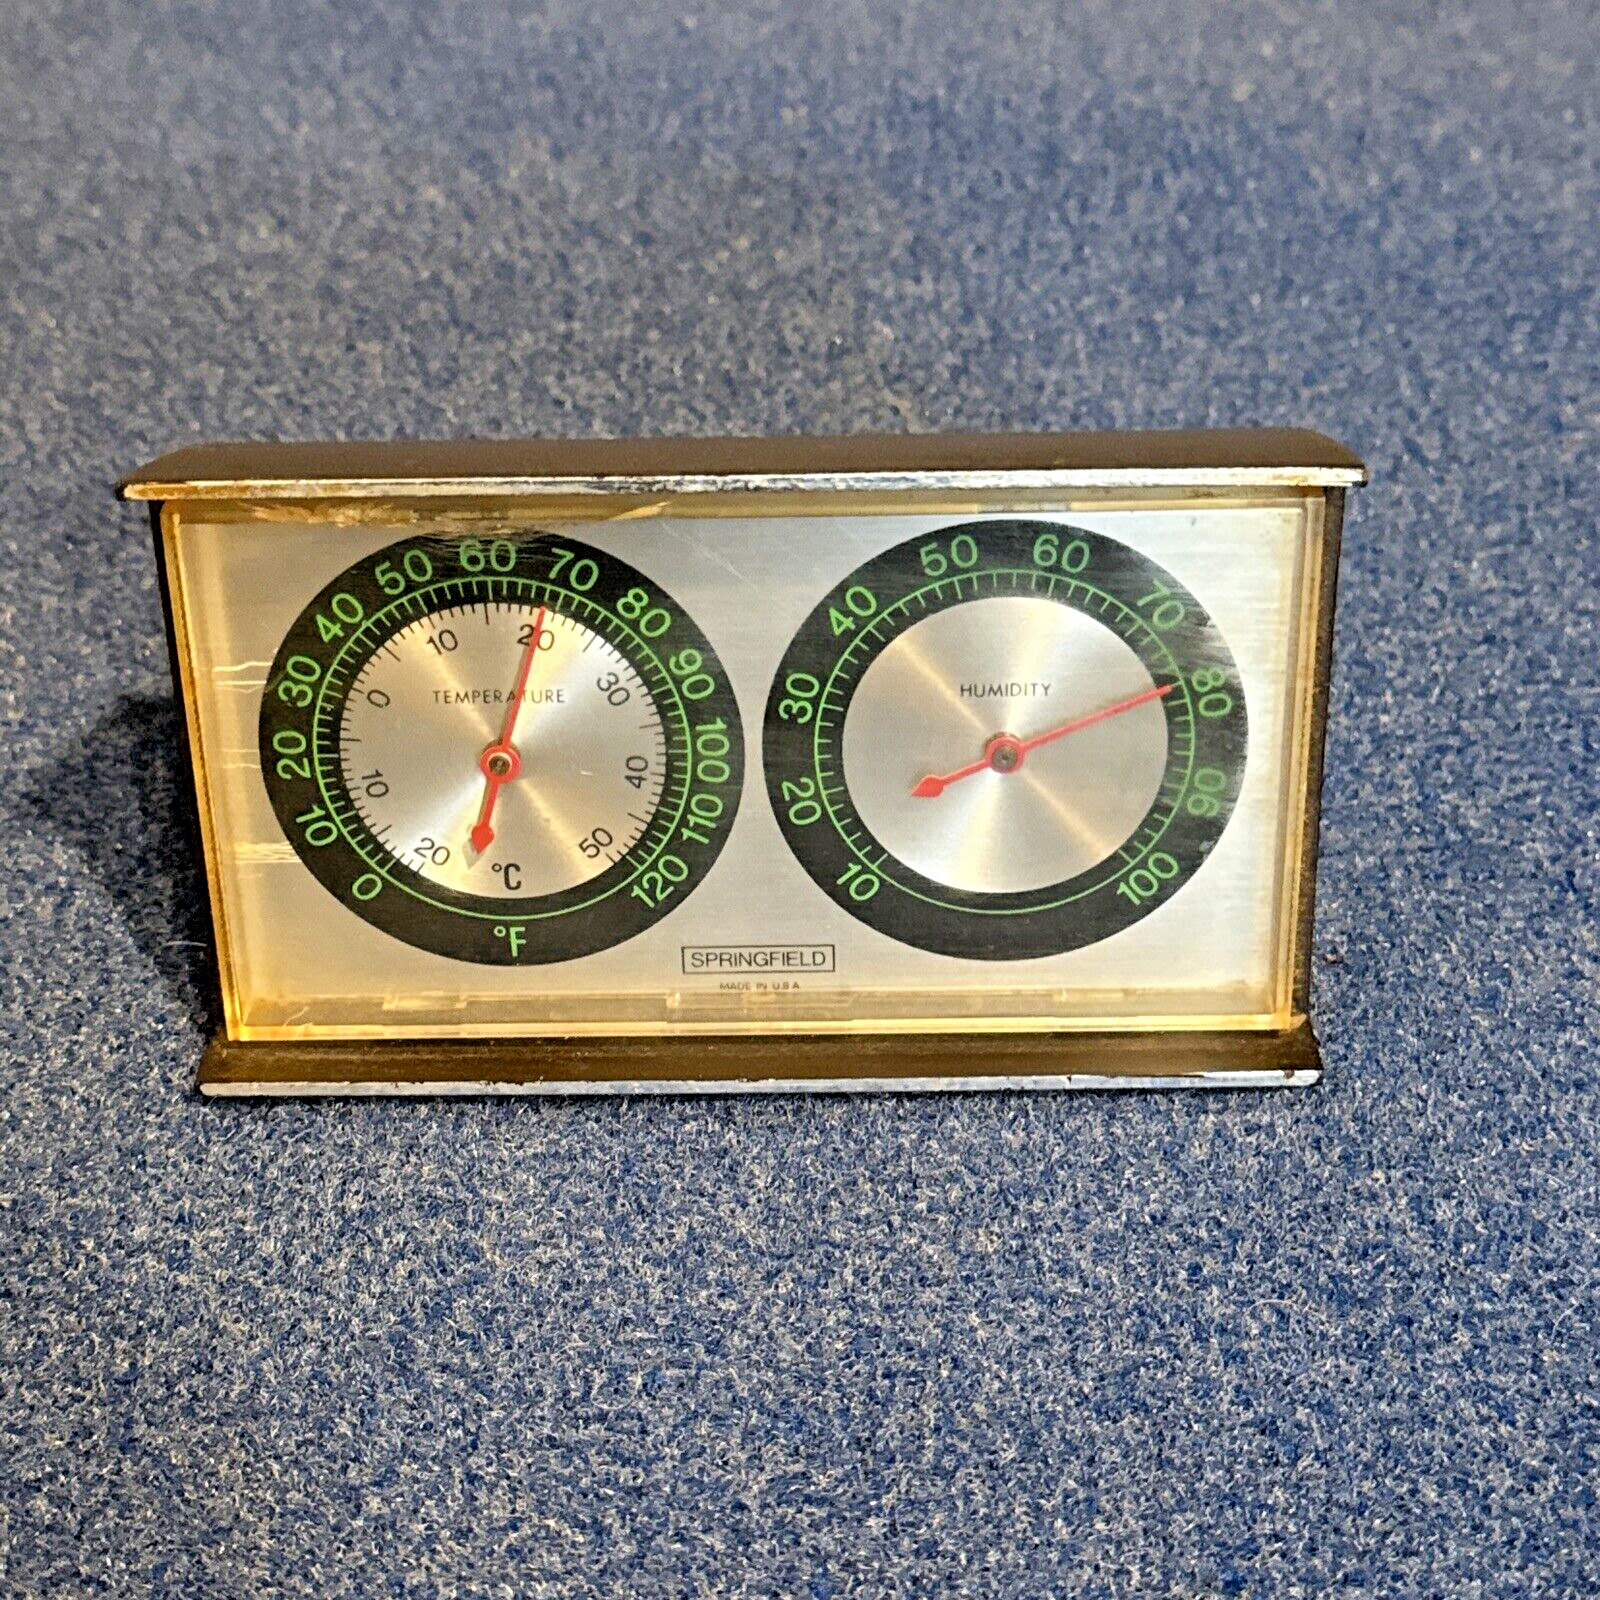 Vintage Springfield Temperature and Humidity Gauge